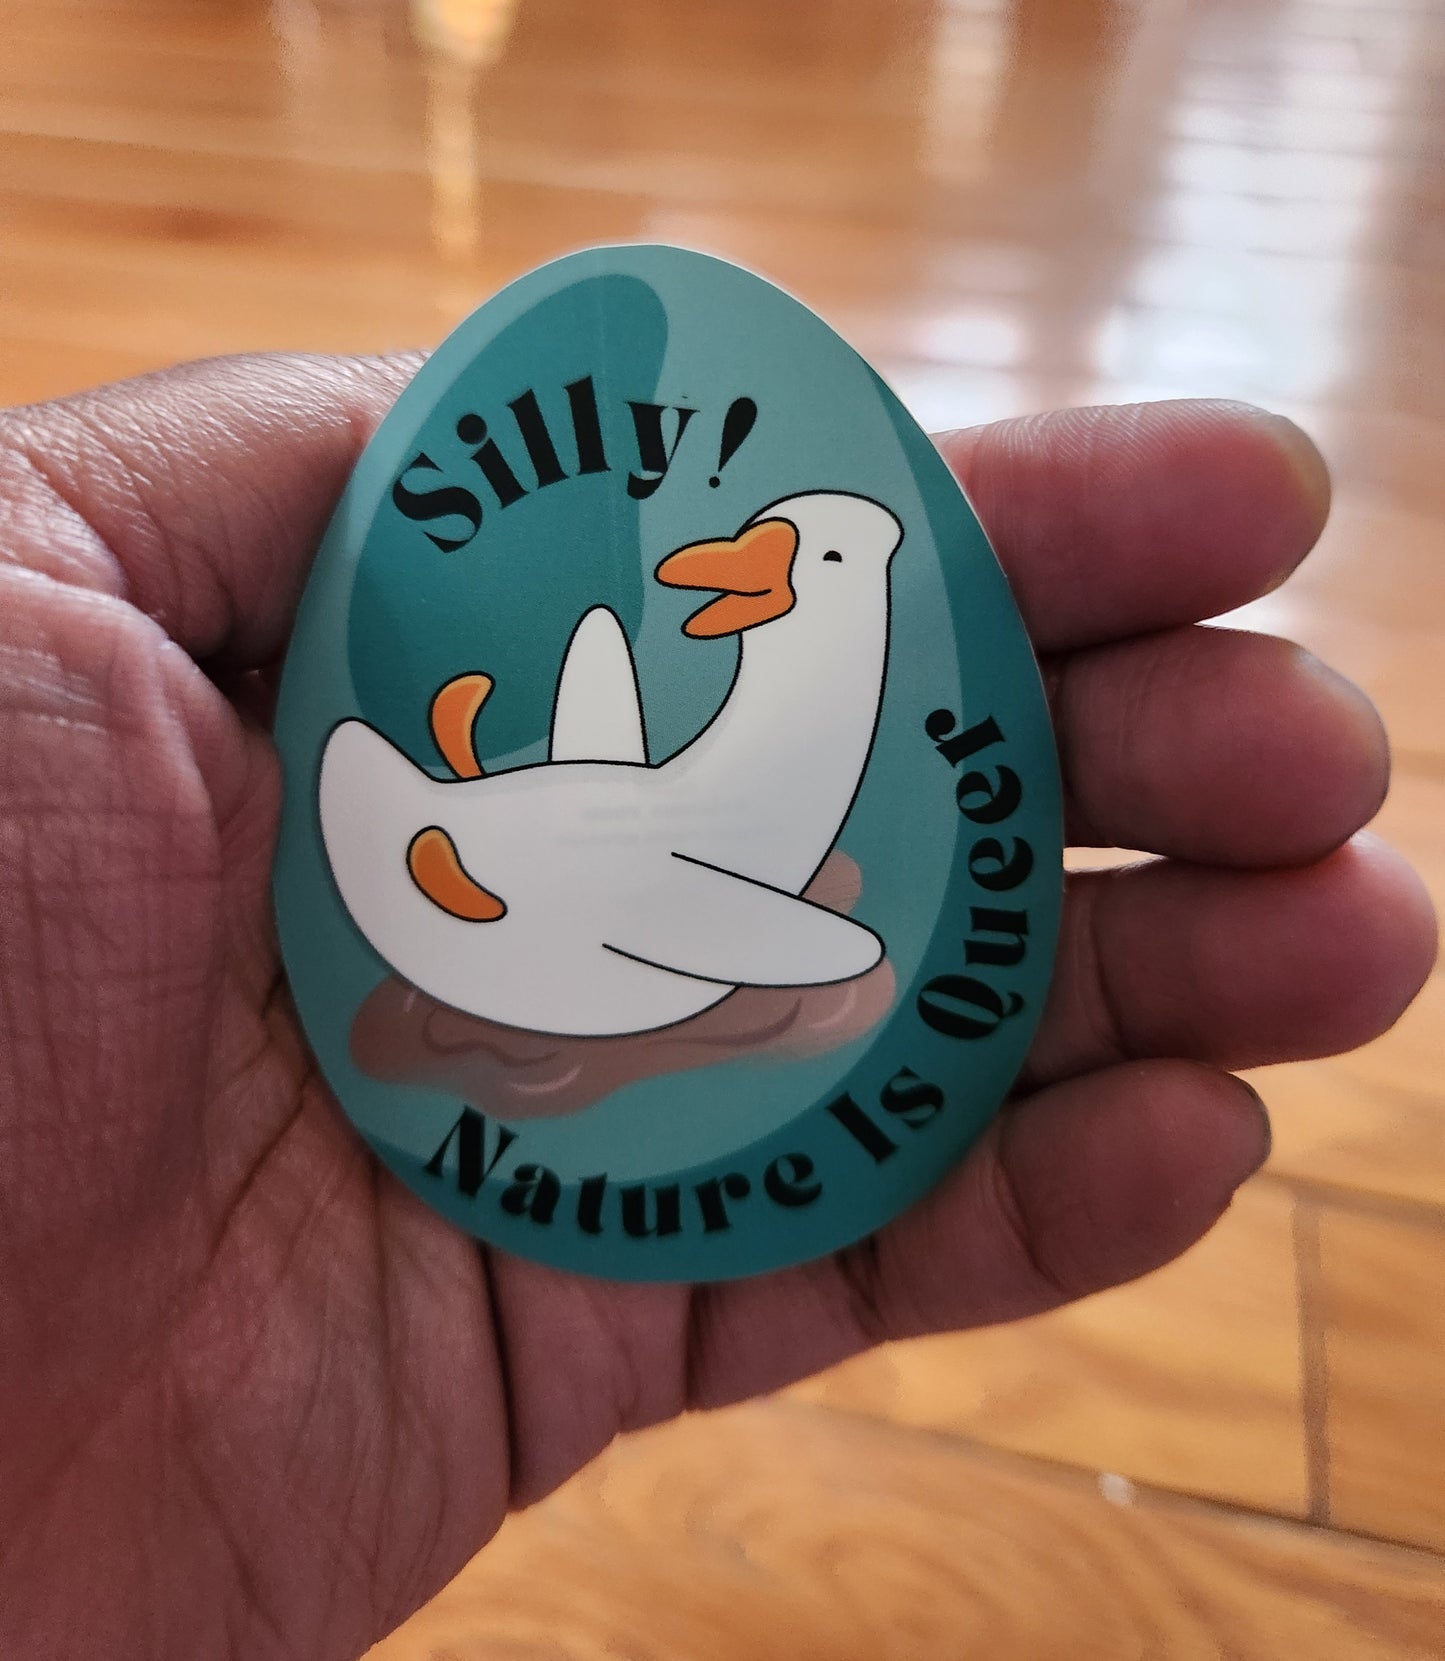 Nature is Queer : Goose!